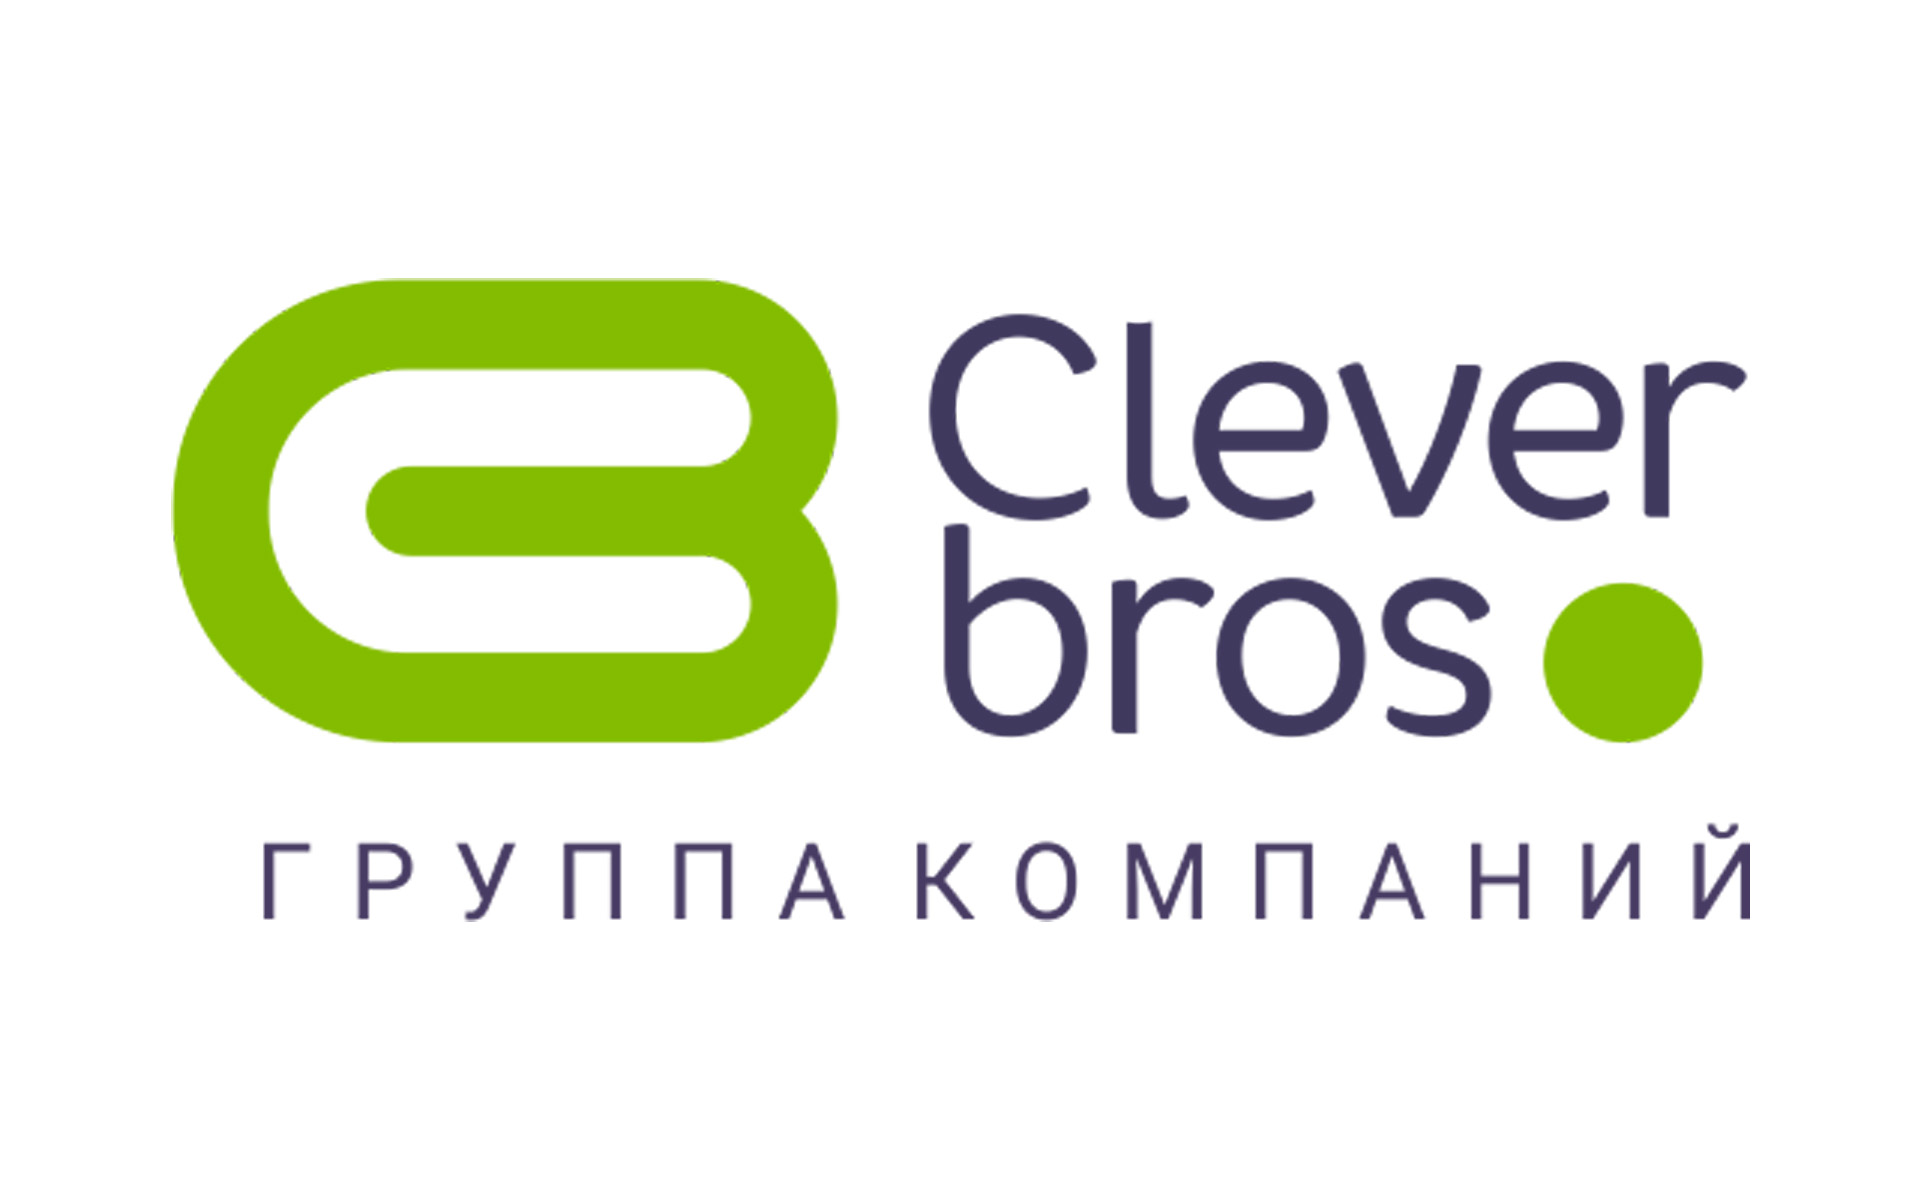 Clever brothers. Компания Clever. Clever Consult эмблема. Клевер Логистик. Clever shop логотип.